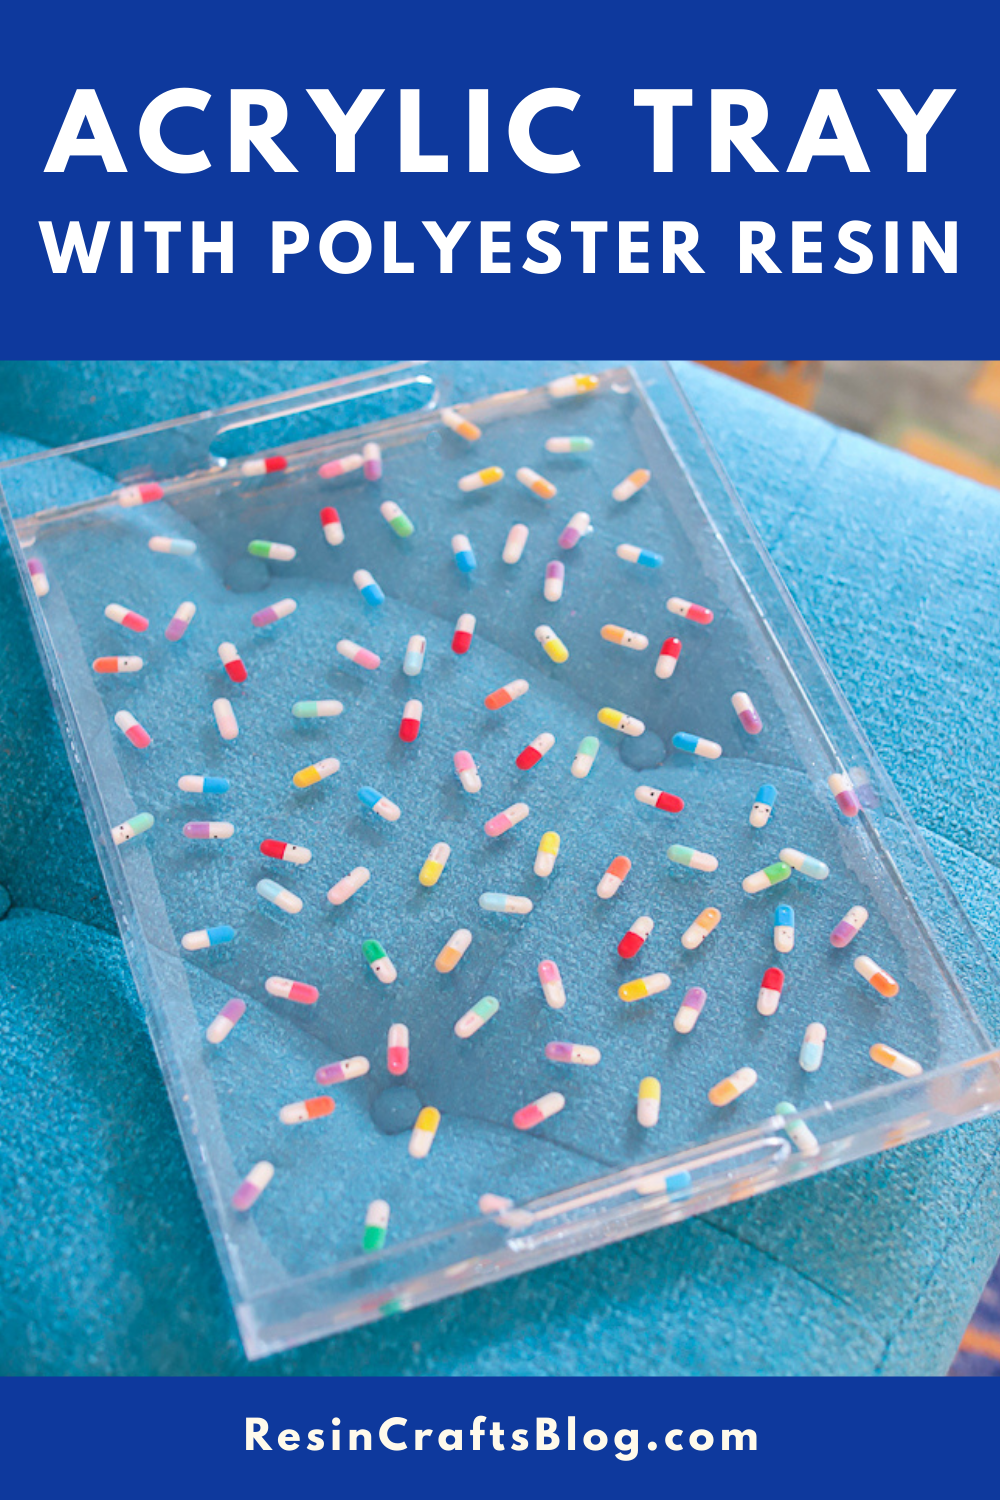 Use Polyester resin to create a crystal clear finish for embedded objects in an acrylic tray! #resincrafts #polyesterresin via @resincraftsblog